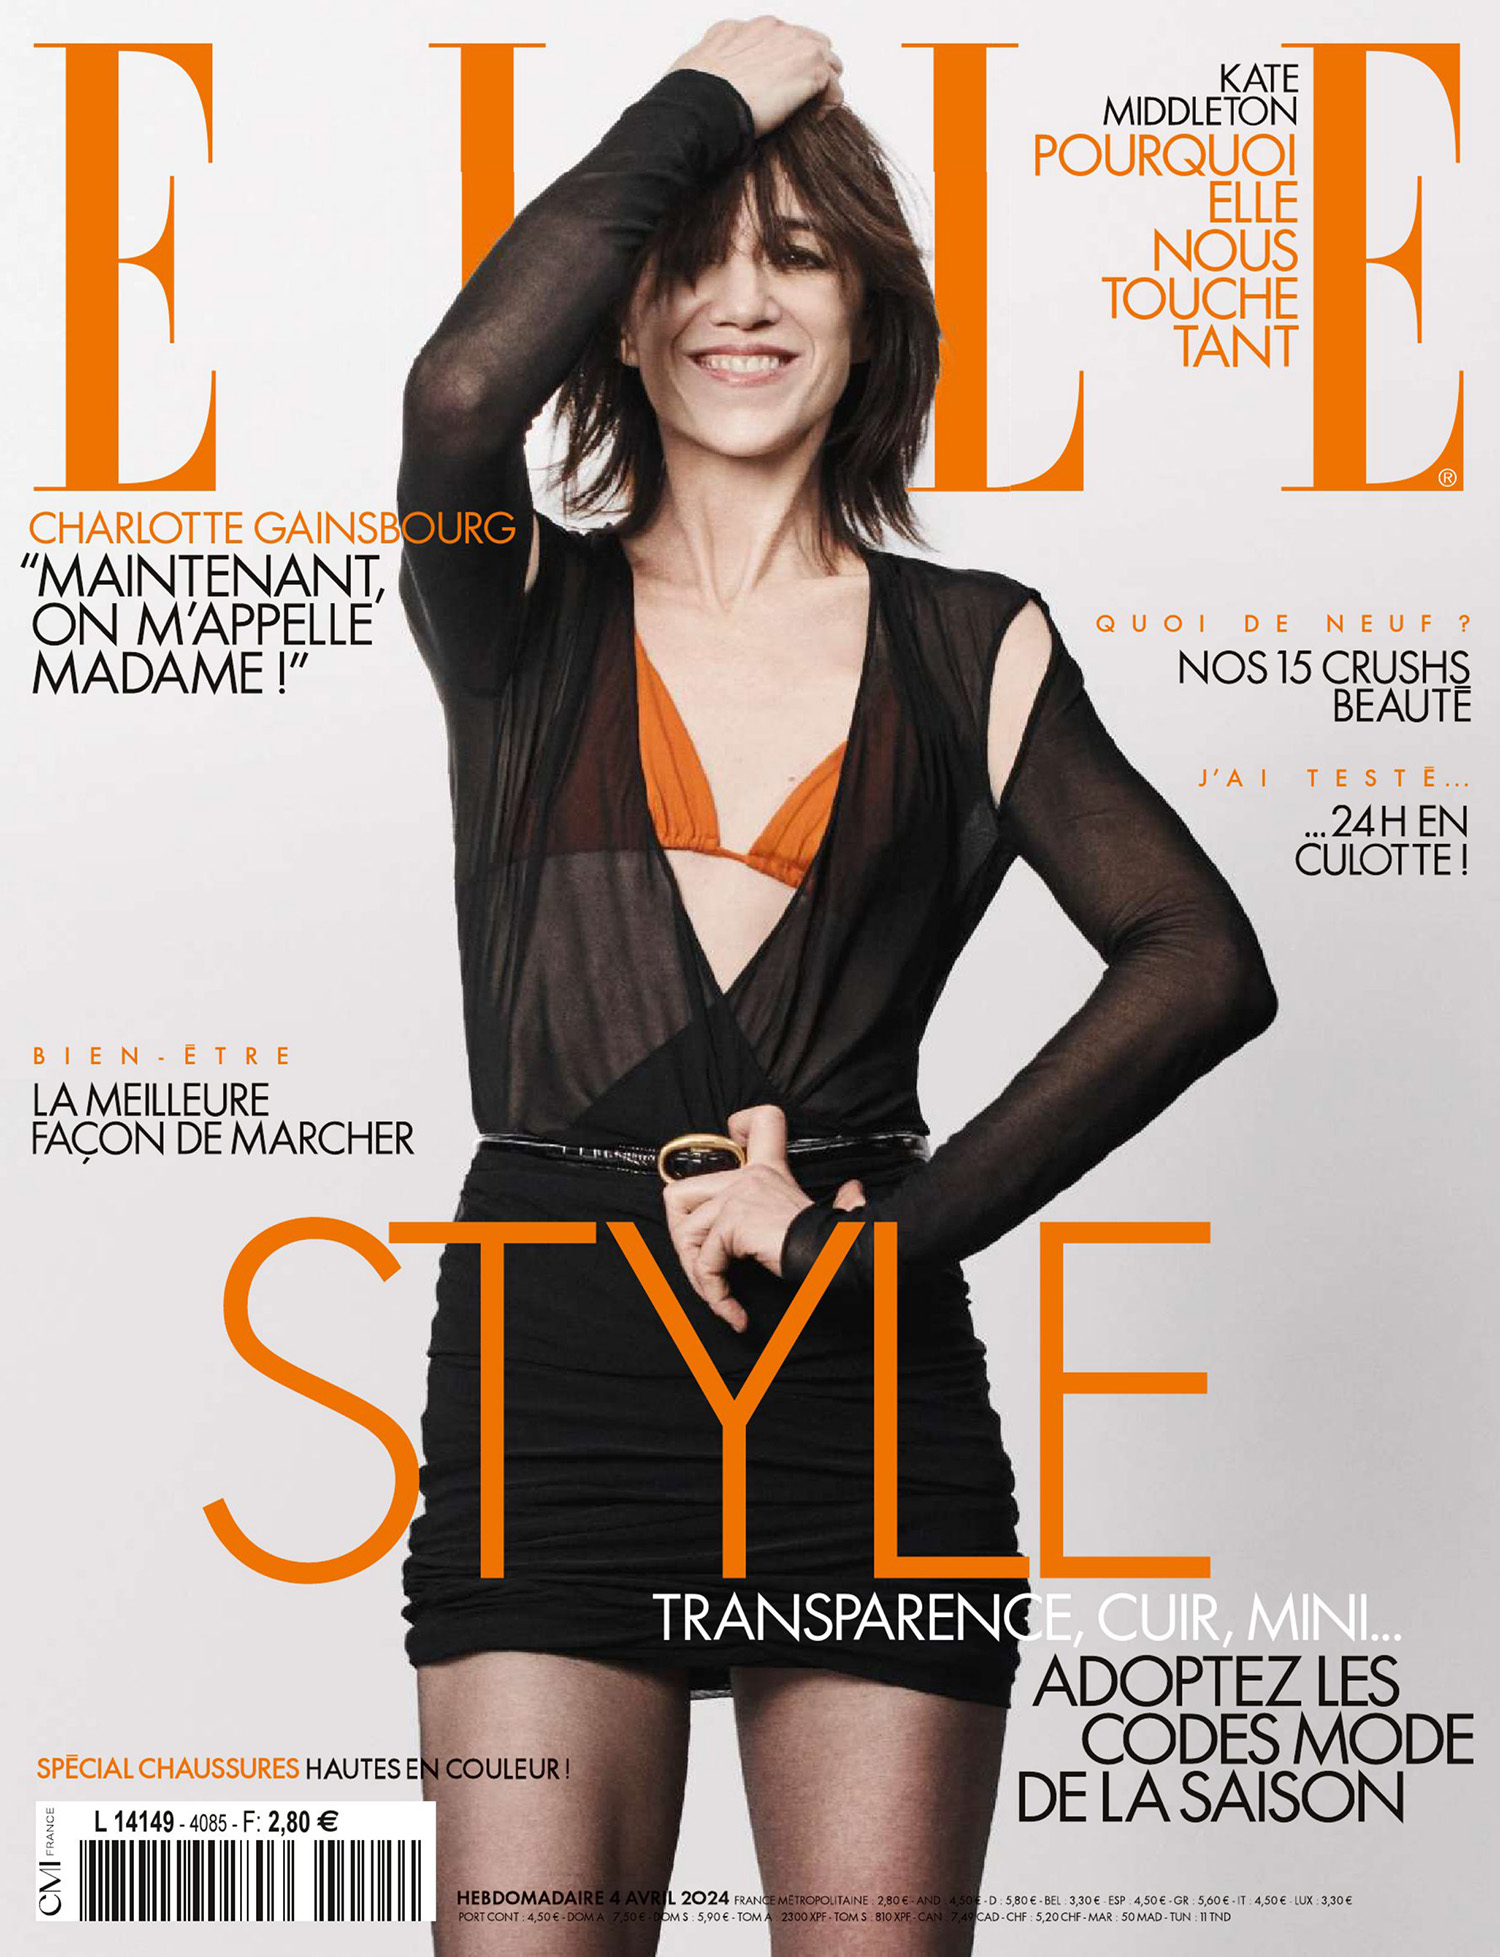 Charlotte Gainsbourg in Saint Laurent on Elle France April 4th, 2024 by Paola Kudacki